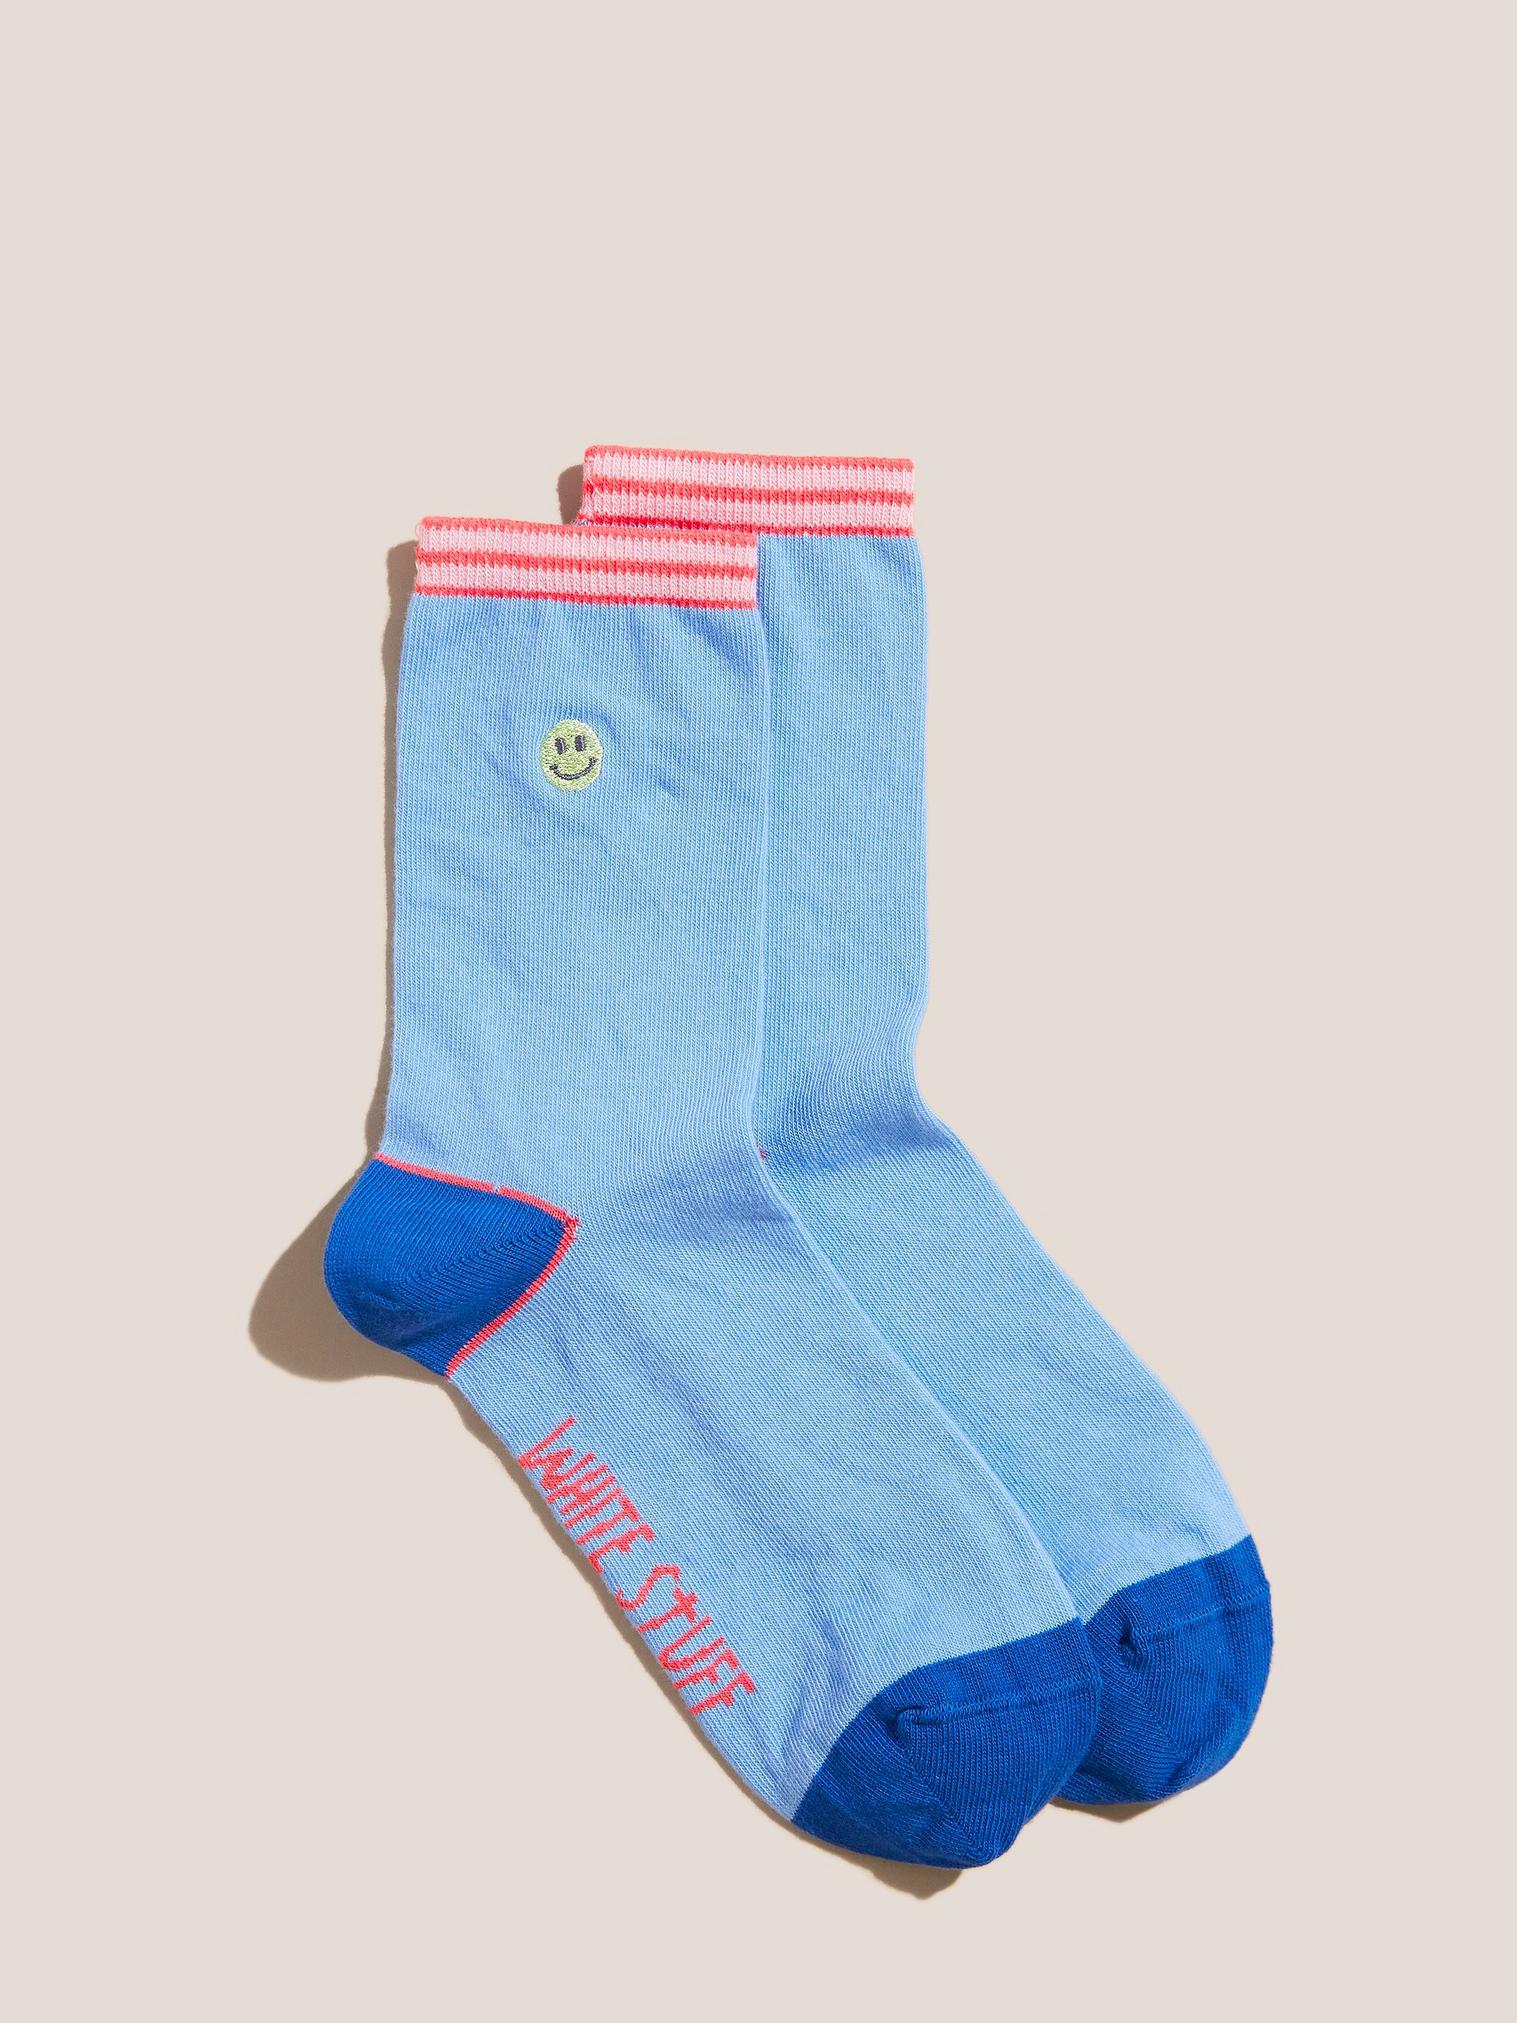 Embroidered Smiley Sock in MID BLUE - FLAT FRONT